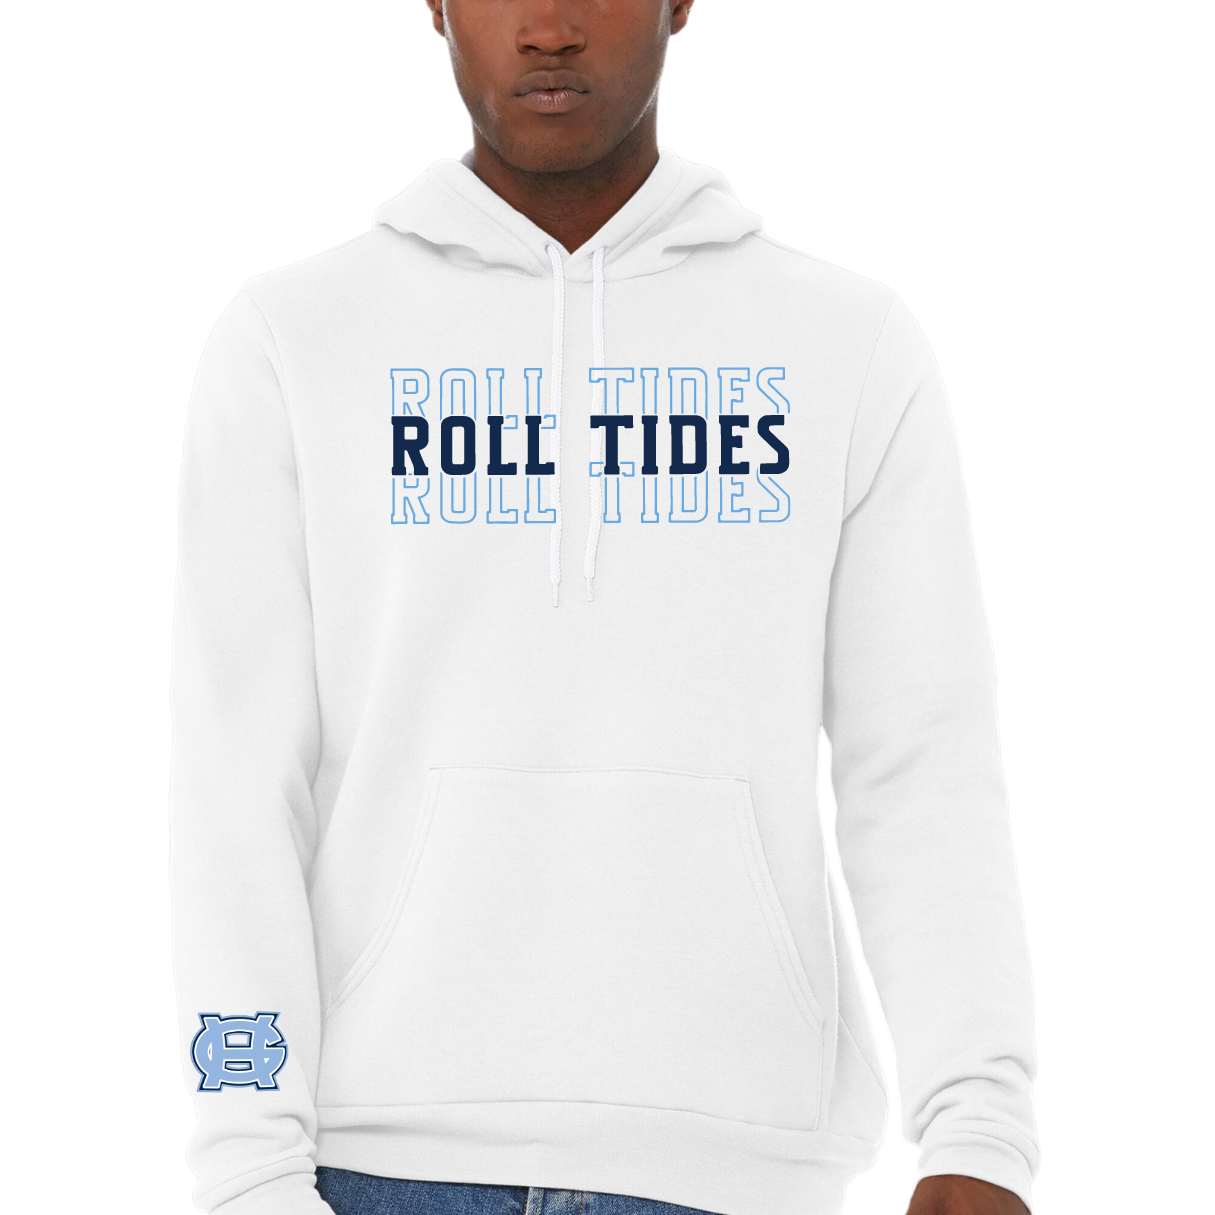 Roll Tides Hooded Sweatshirt - Adult and Youth